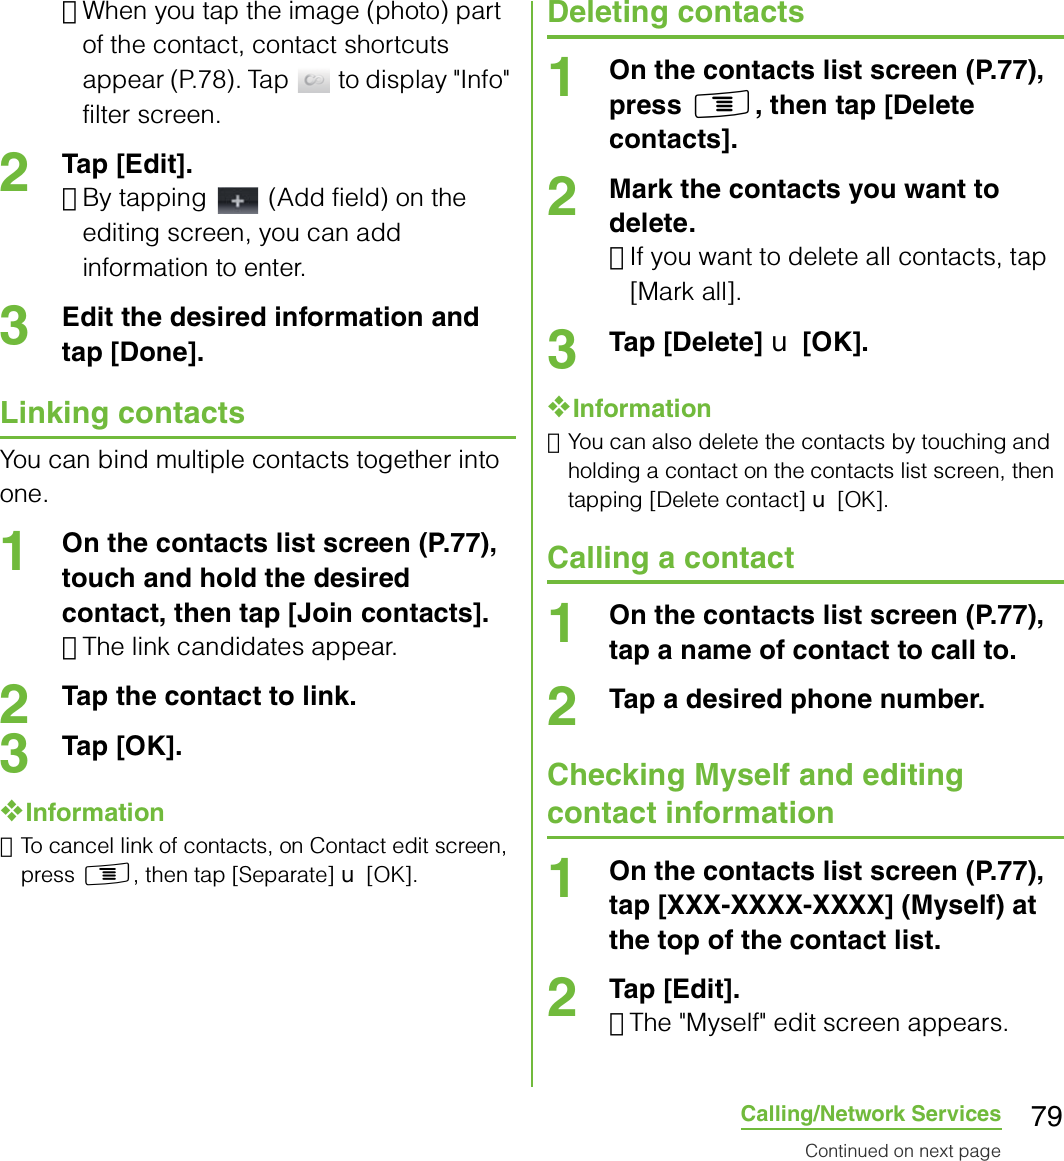 79Calling/Network Services･When you tap the image (photo) part of the contact, contact shortcuts appear (P.78). Tap   to display &quot;Info&quot; filter screen.2Tap [Edit].･By tapping   (Add field) on the editing screen, you can add information to enter.3Edit the desired information and tap [Done].Linking contactsYou can bind multiple contacts together into one.1On the contacts list screen (P.77), touch and hold the desired contact, then tap [Join contacts].･The link candidates appear.2Tap the contact to link.3Tap [OK].❖Information･To cancel link of contacts, on Contact edit screen, press t, then tap [Separate] X [OK].Deleting contacts1On the contacts list screen (P.77), press t, then tap [Delete contacts].2Mark the contacts you want to delete.･If you want to delete all contacts, tap [Mark all].3Tap [Delete] X [OK].❖Information･You can also delete the contacts by touching and holding a contact on the contacts list screen, then tapping [Delete contact] X [OK].Calling a contact1On the contacts list screen (P.77), tap a name of contact to call to.2Tap a desired phone number.Checking Myself and editing contact information1On the contacts list screen (P.77), tap [XXX-XXXX-XXXX] (Myself) at the top of the contact list.2Tap [Edit].･The &quot;Myself&quot; edit screen appears.Continued on next page